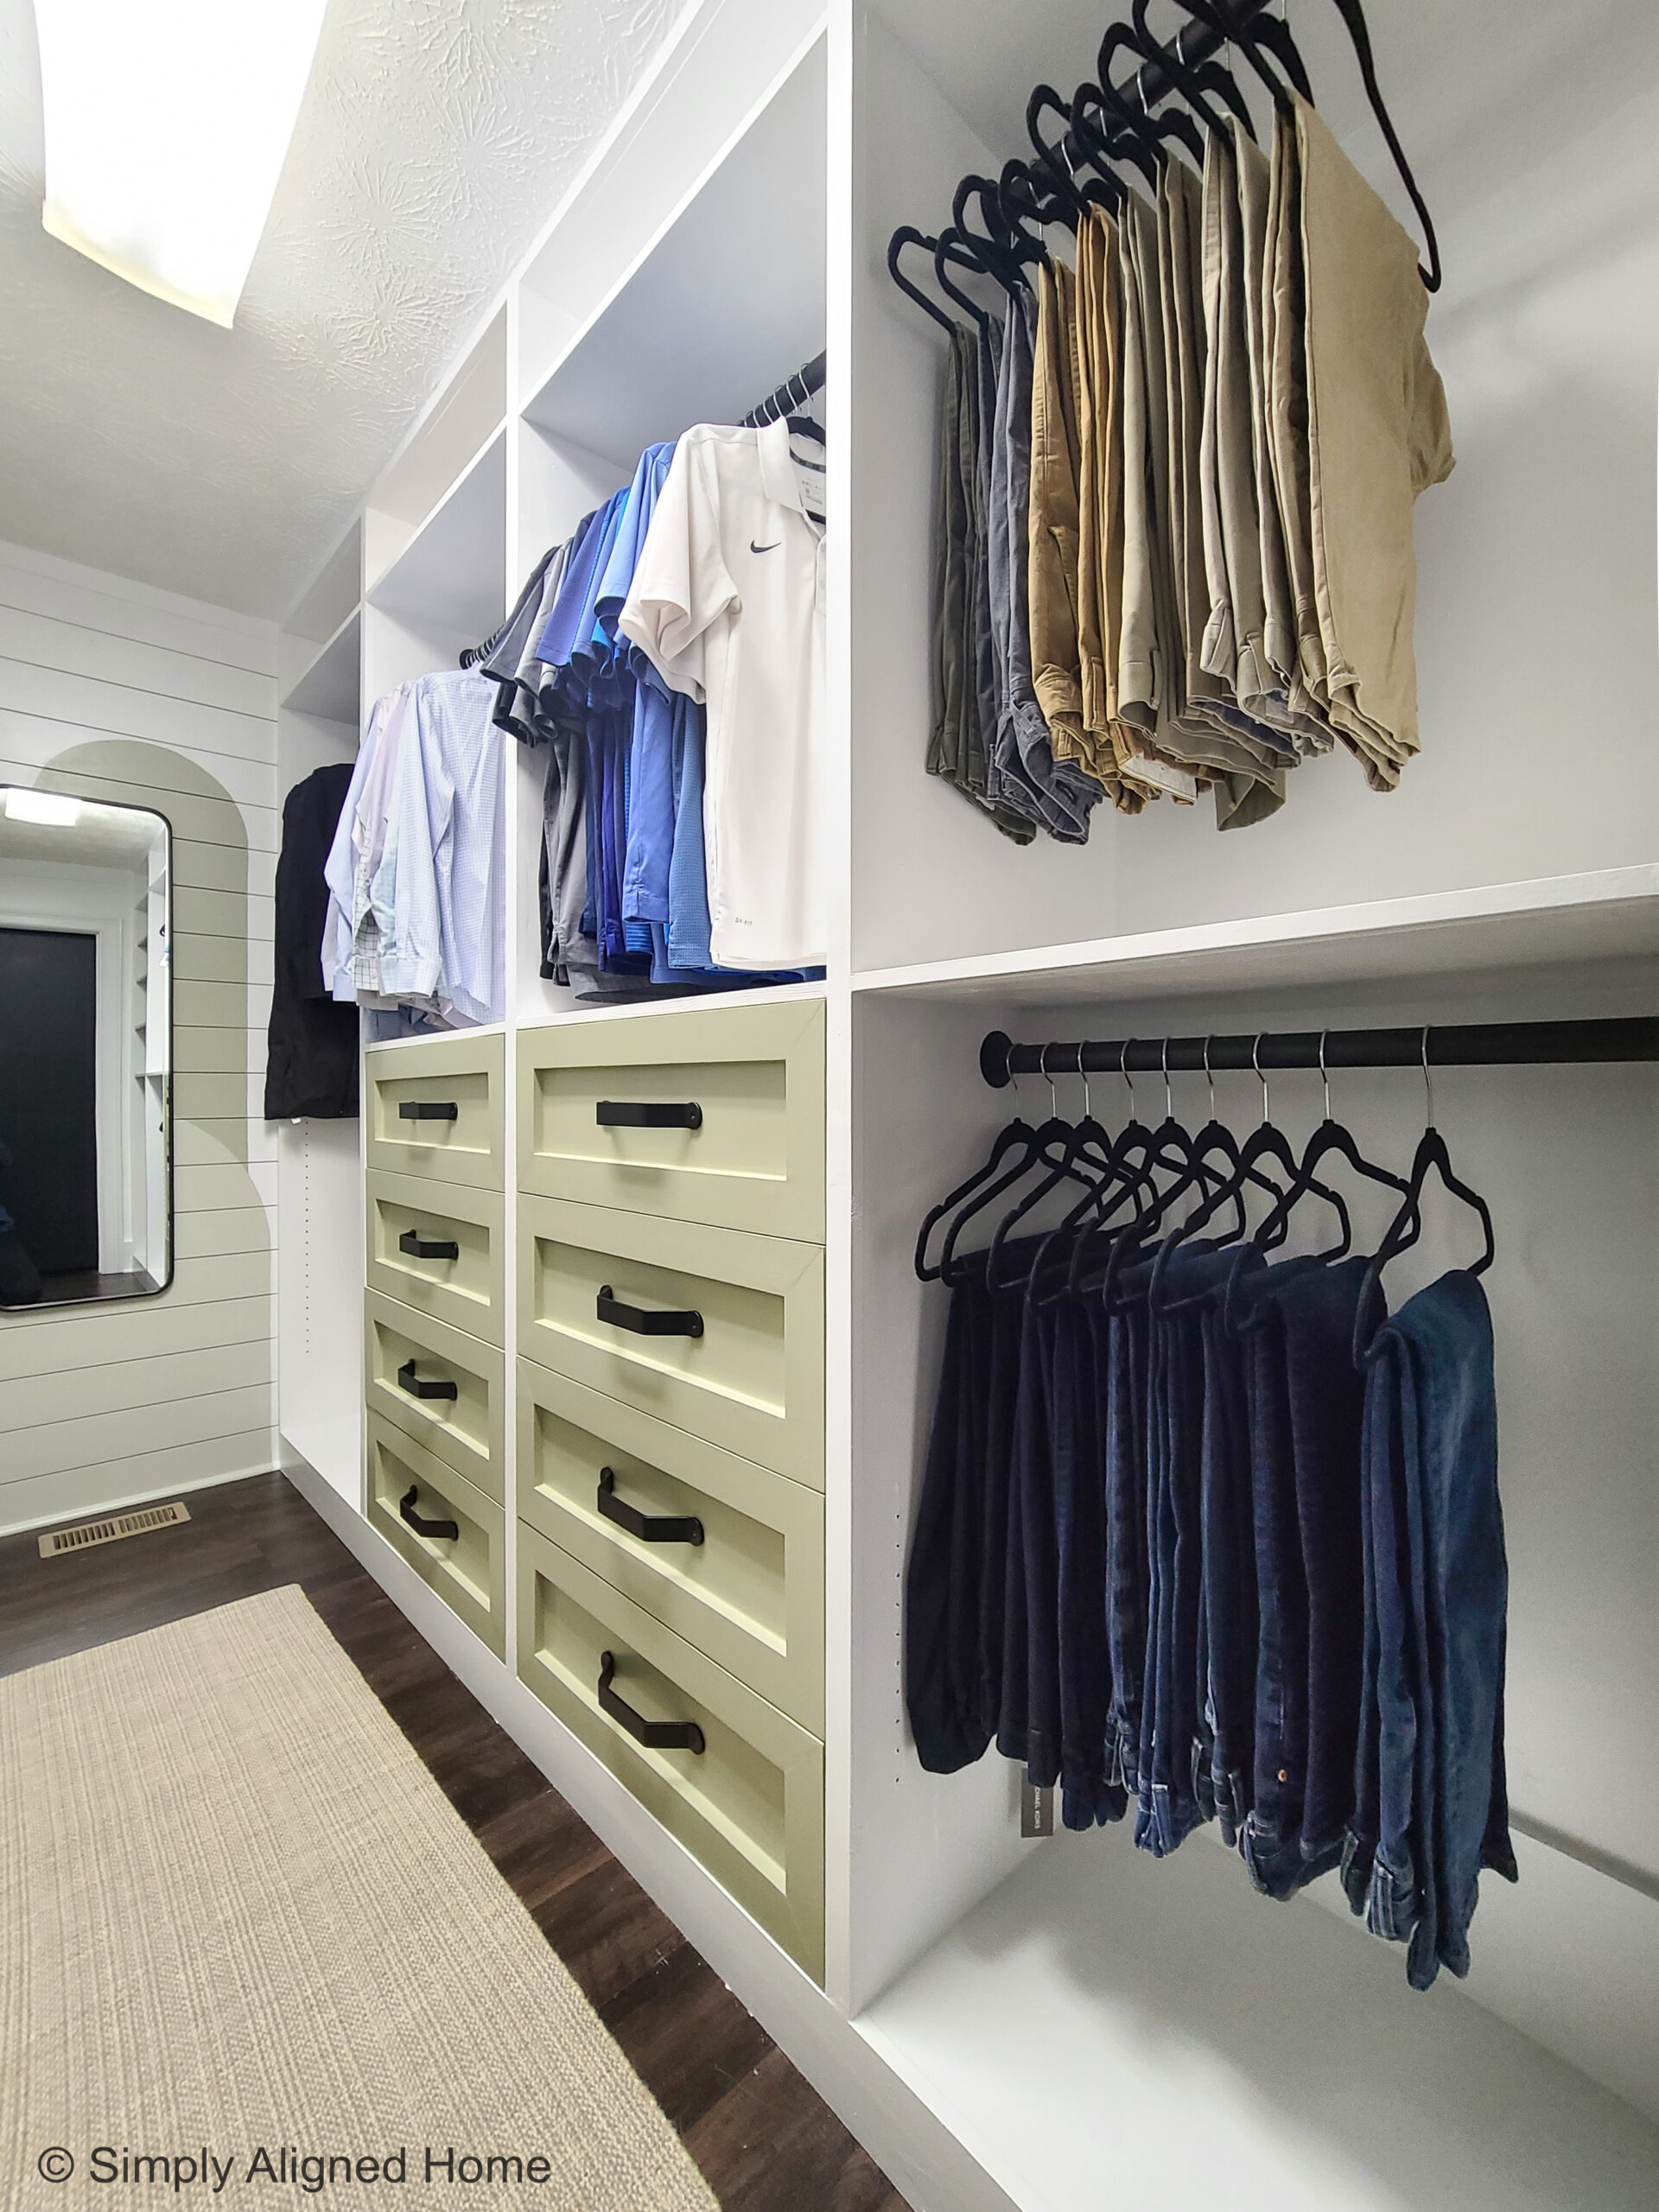 https://simplyalignedhome.com/wp-content/uploads/2022/05/Simply-Aligned-Home-Custom-Master-Closet-with-Extra-Hanging-Space-and-Built-In-Drawers-scaled.jpg